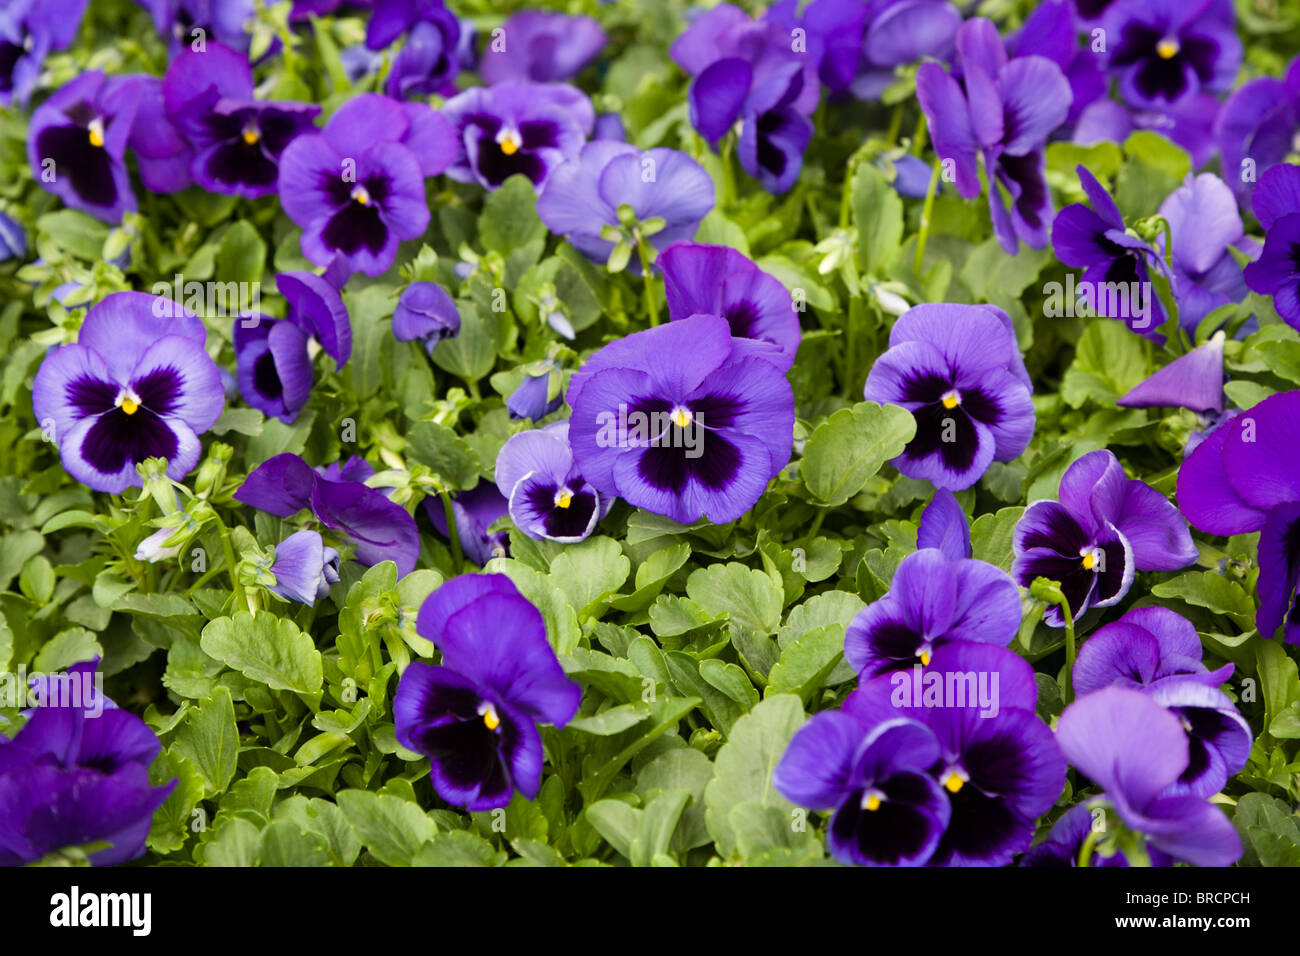 Garden Pansy (Viola × wittrockiana), grown indoors in geothermally heated greenhouses, Hveragerdi, South Iceland. Stock Photo